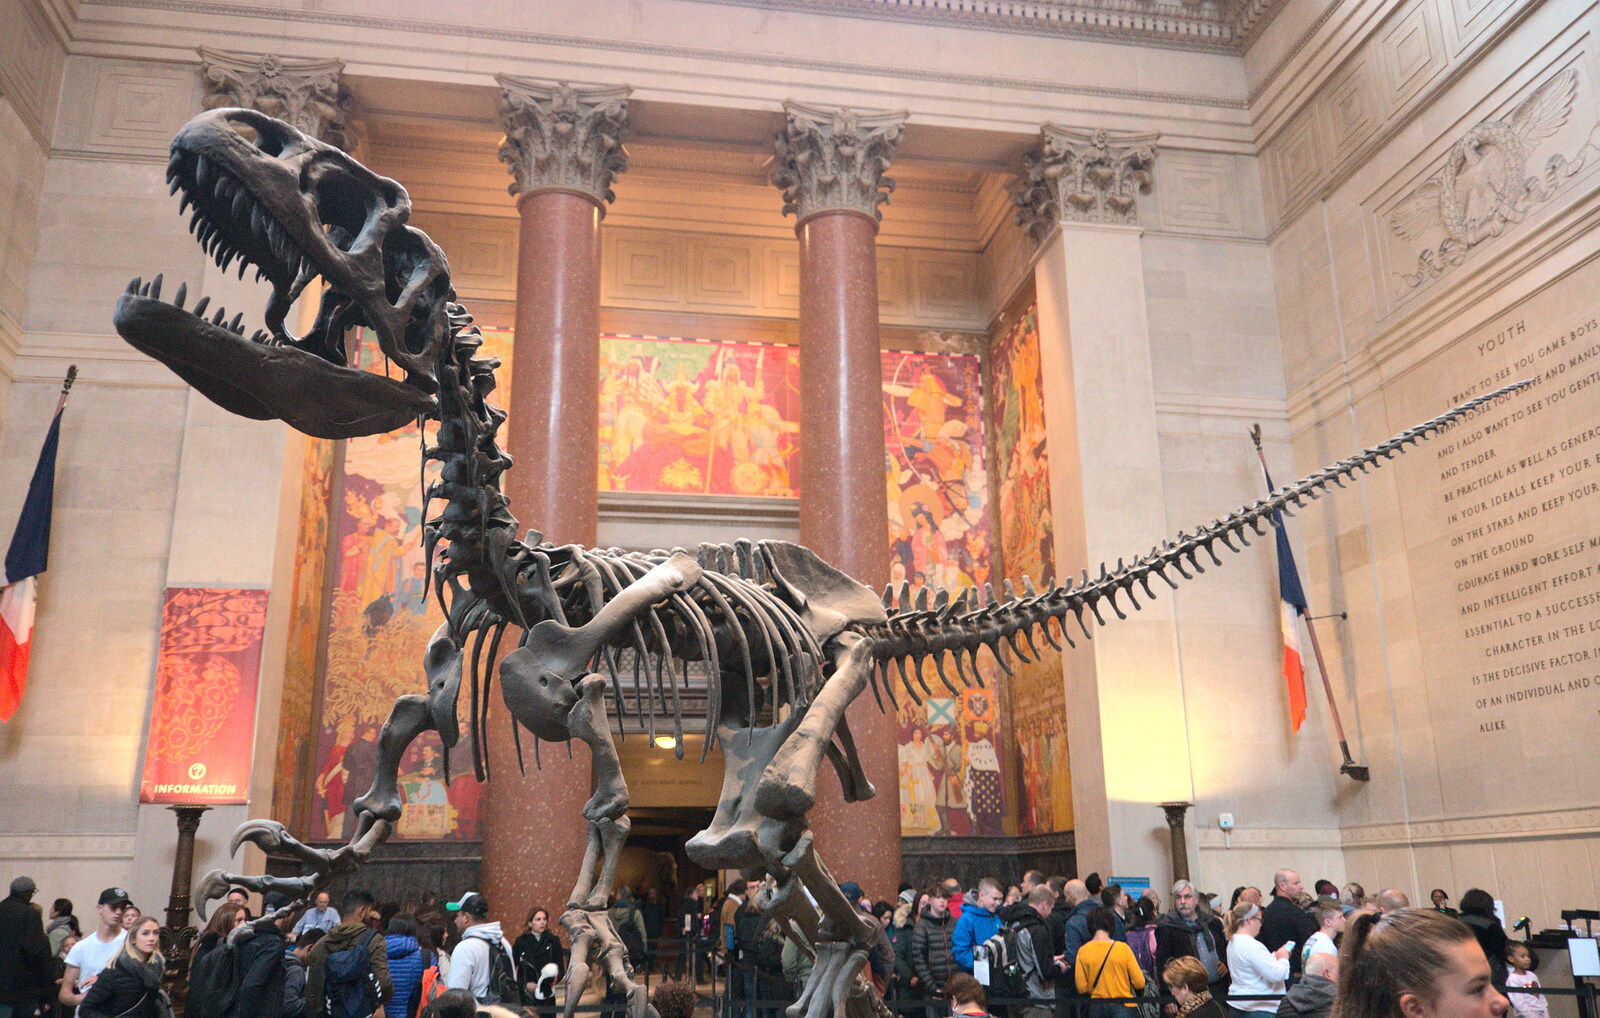 Cool dinosaur skeleton in the entrance lobby from Open-top Buses and a Day at the Museum, New York, United States - 22nd October 2018